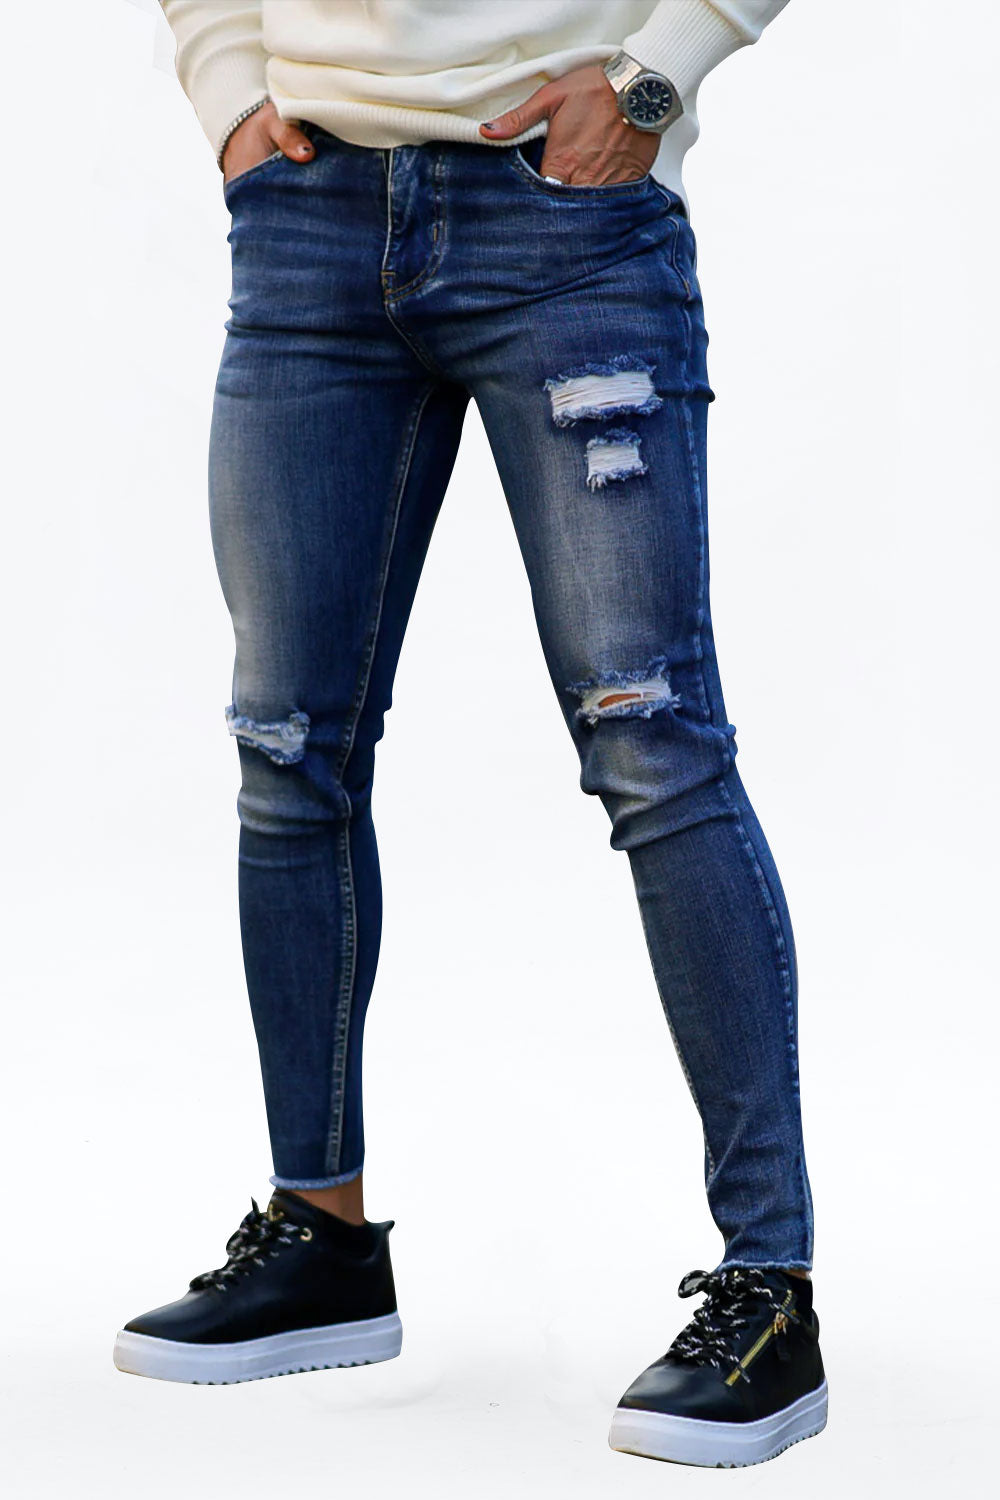 Gingtto Ripped Blue Knee Skinny Fashion Jeans for – GINGTTO